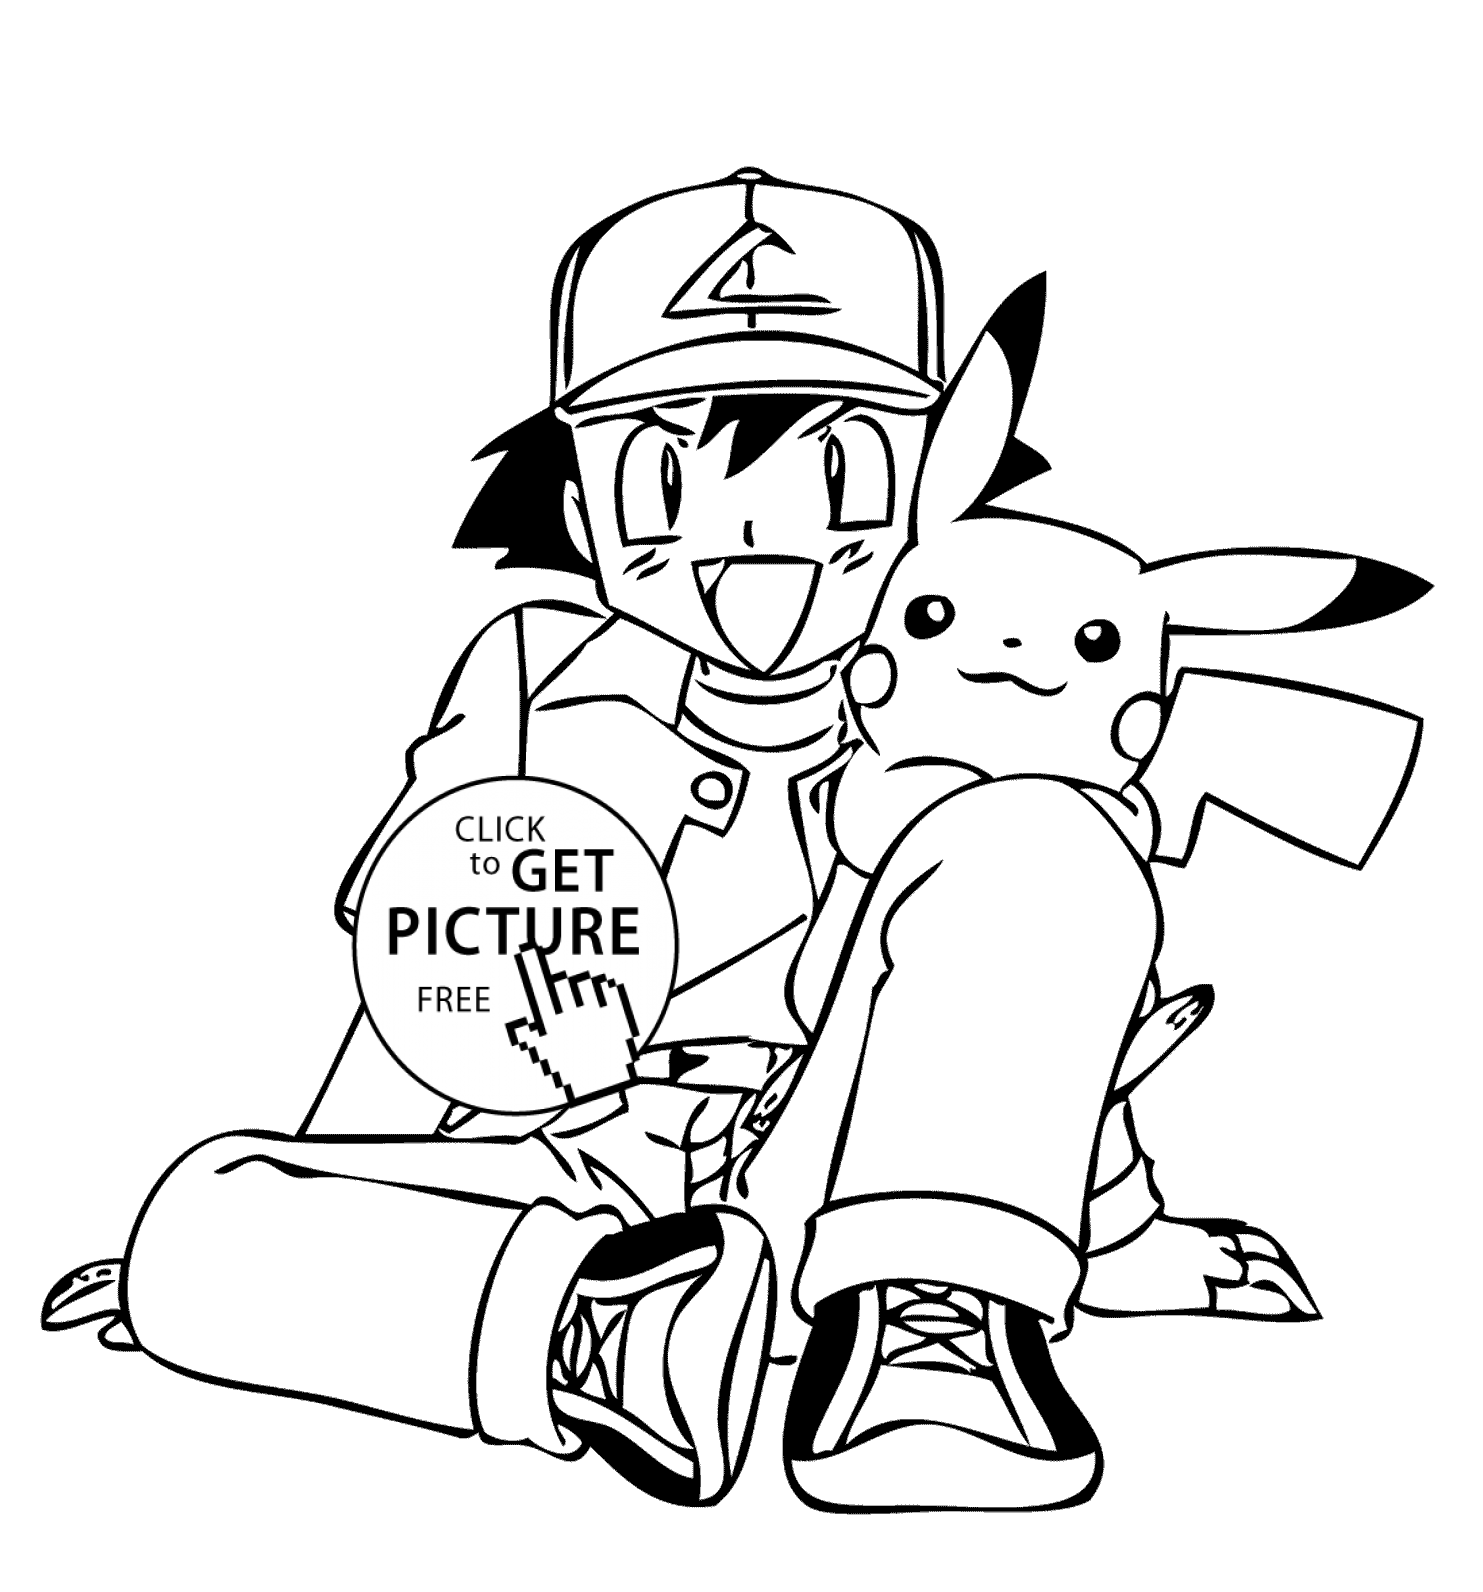 pokemon pictures from black and white pokemon pikachu coloring pages to print coloring pages black pictures from and pokemon white 